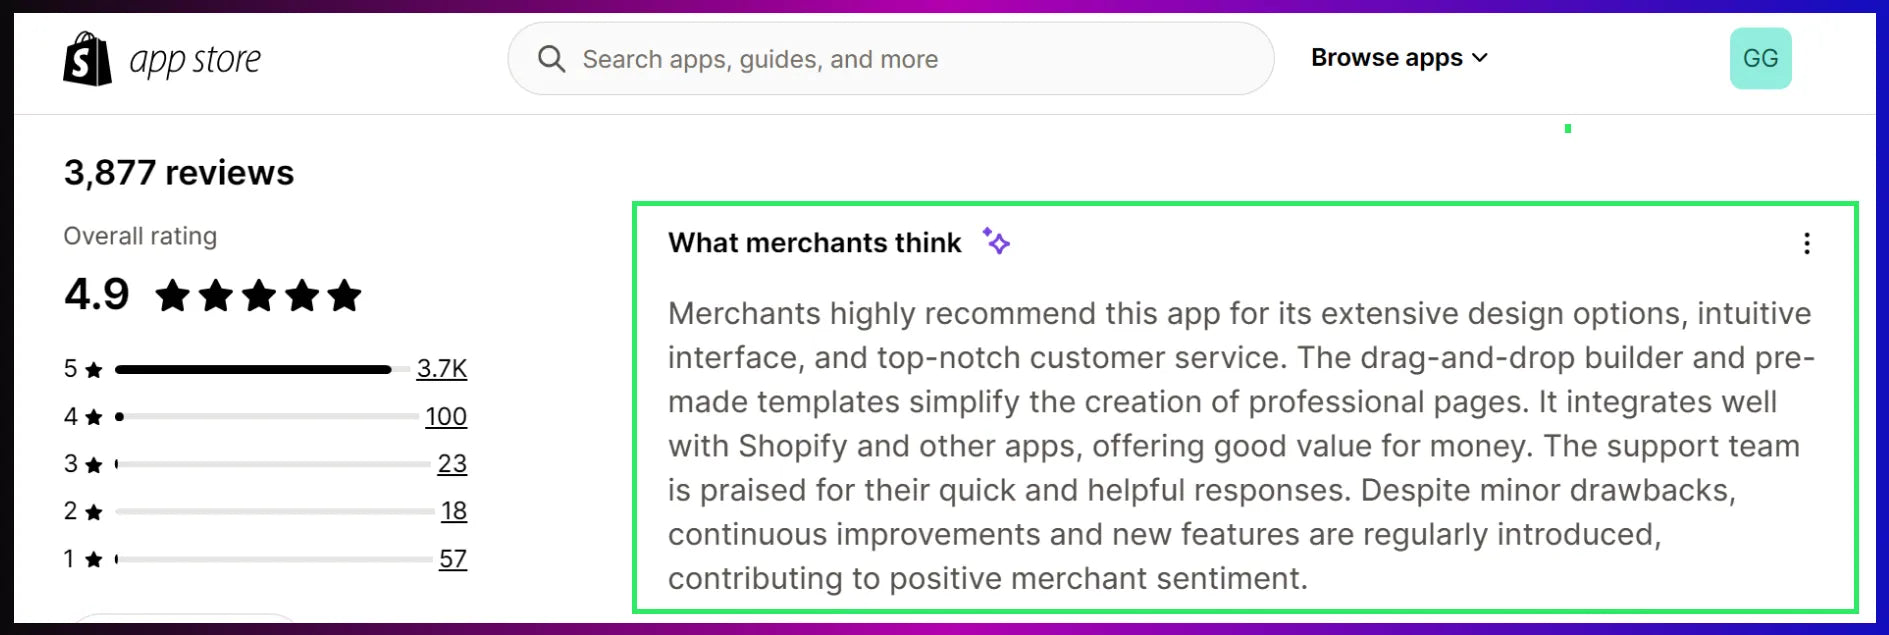 Summary of GemPages’ merchant reviews